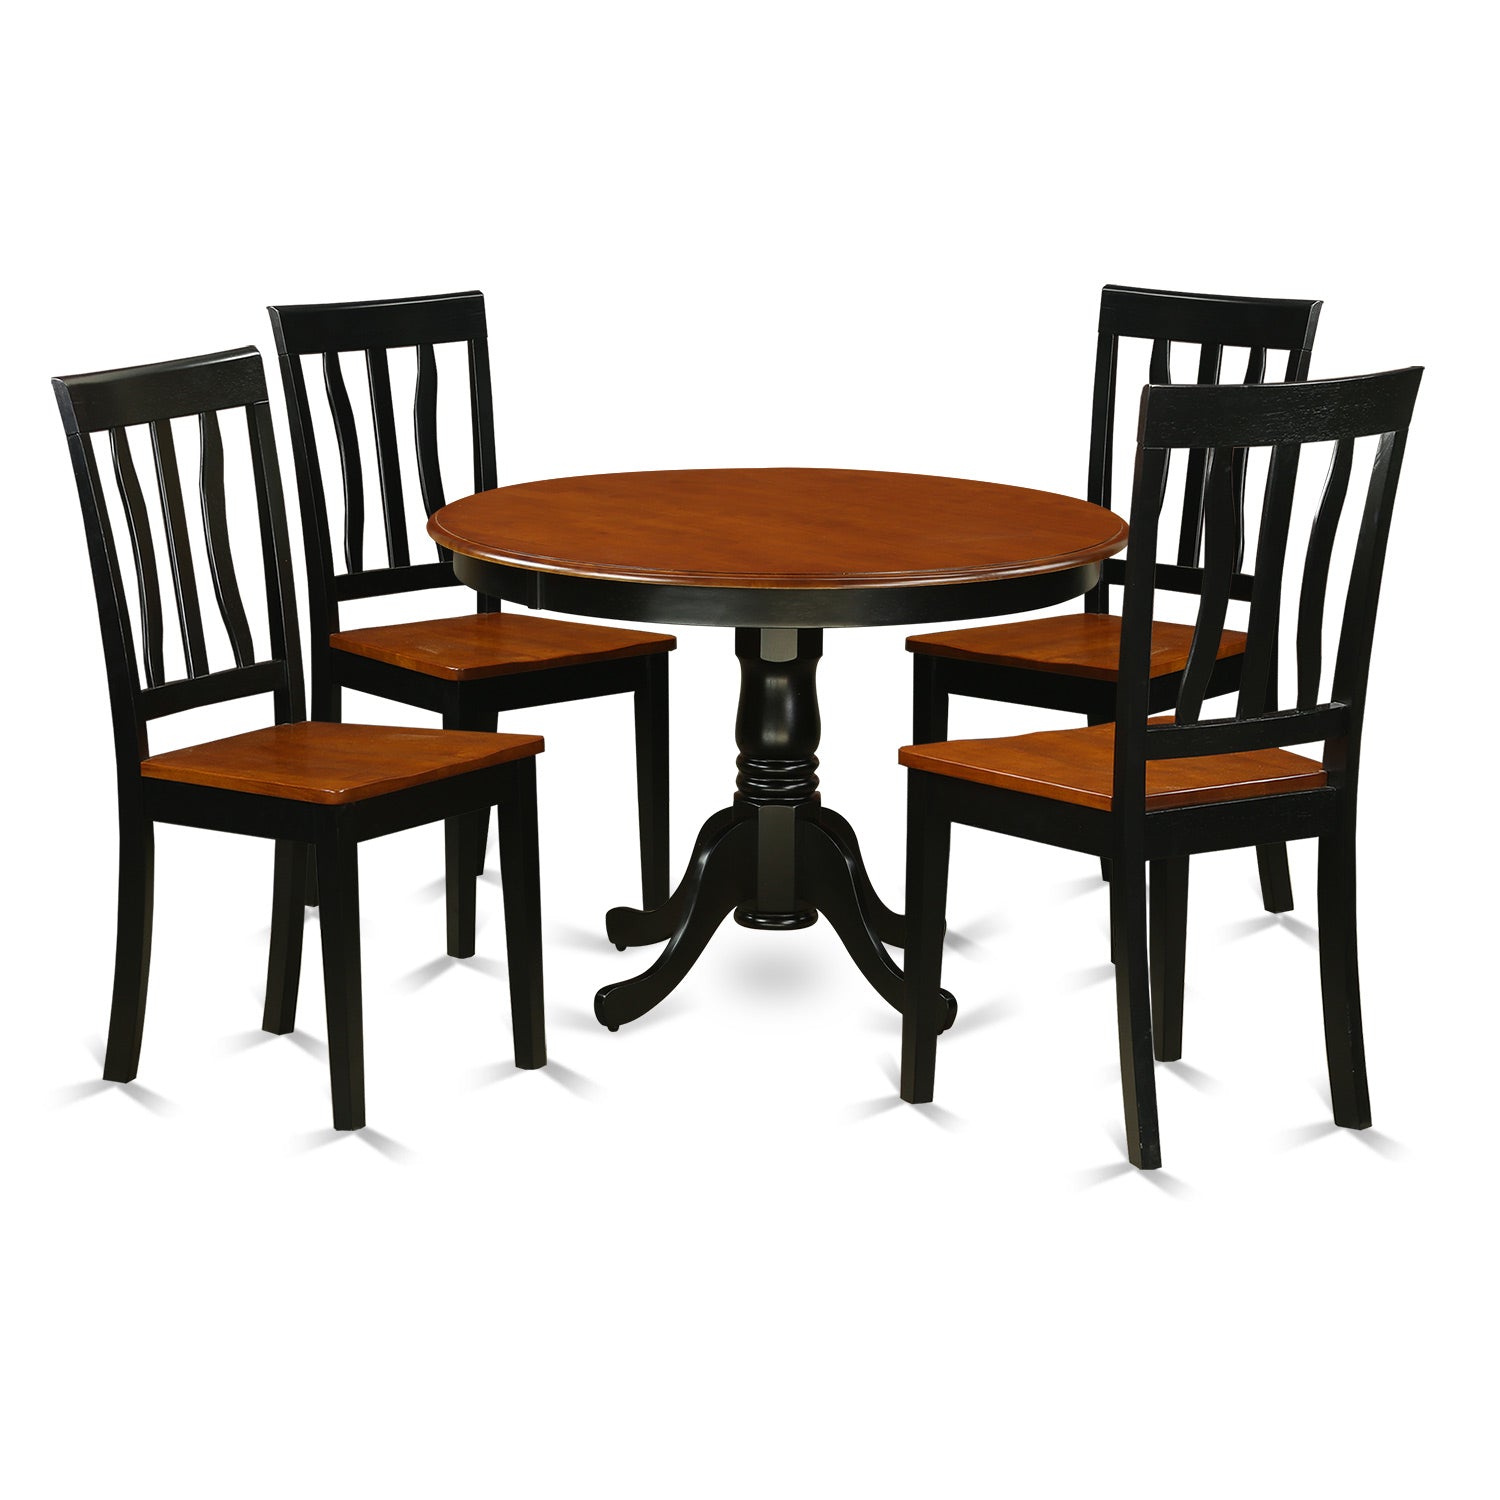 HLAN5-BCH-W 5 Pc set with a Round Dinette Table and 4 Wood Dinette Chairs in Black and Cherry